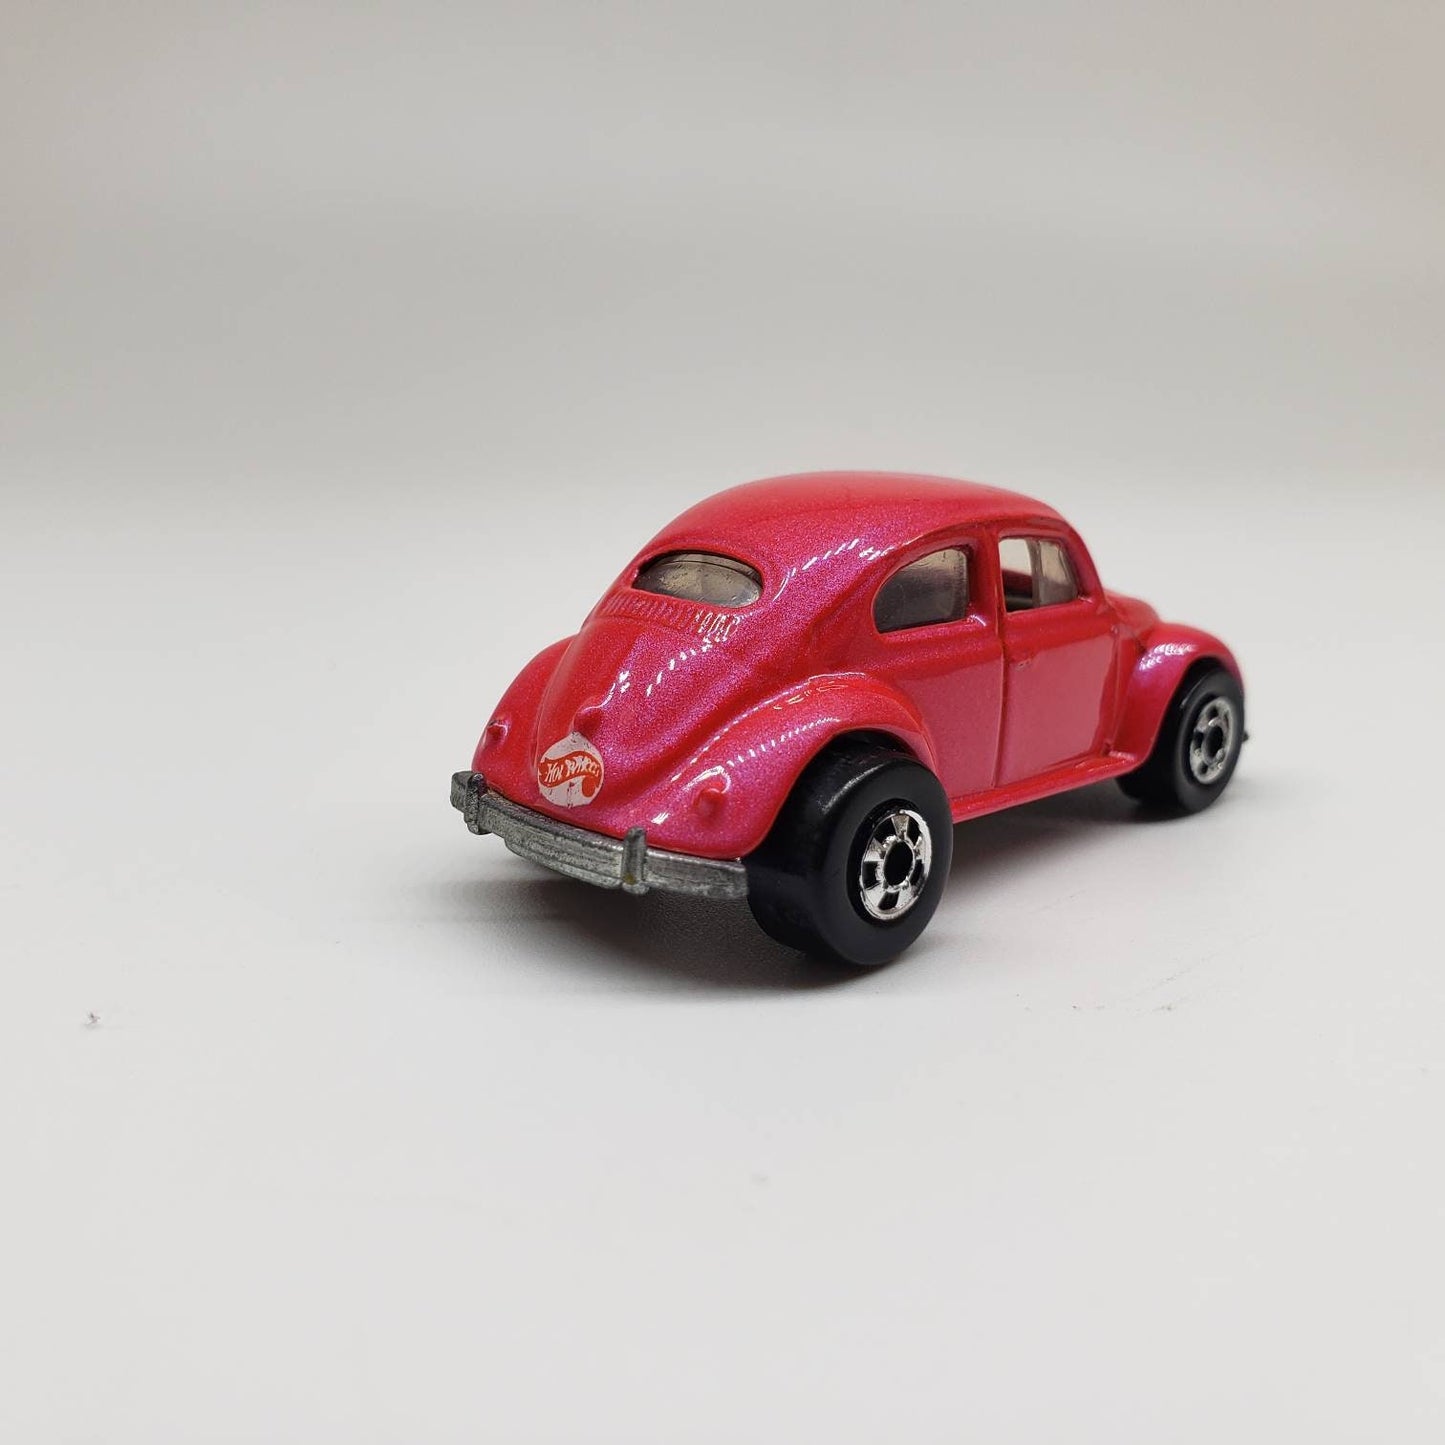 Hot Wheels VW Bug Pink Pearl Driver Volkswagen Beetle Collectible Miniature Scale Model Toy Car Perfect Birthday Gift